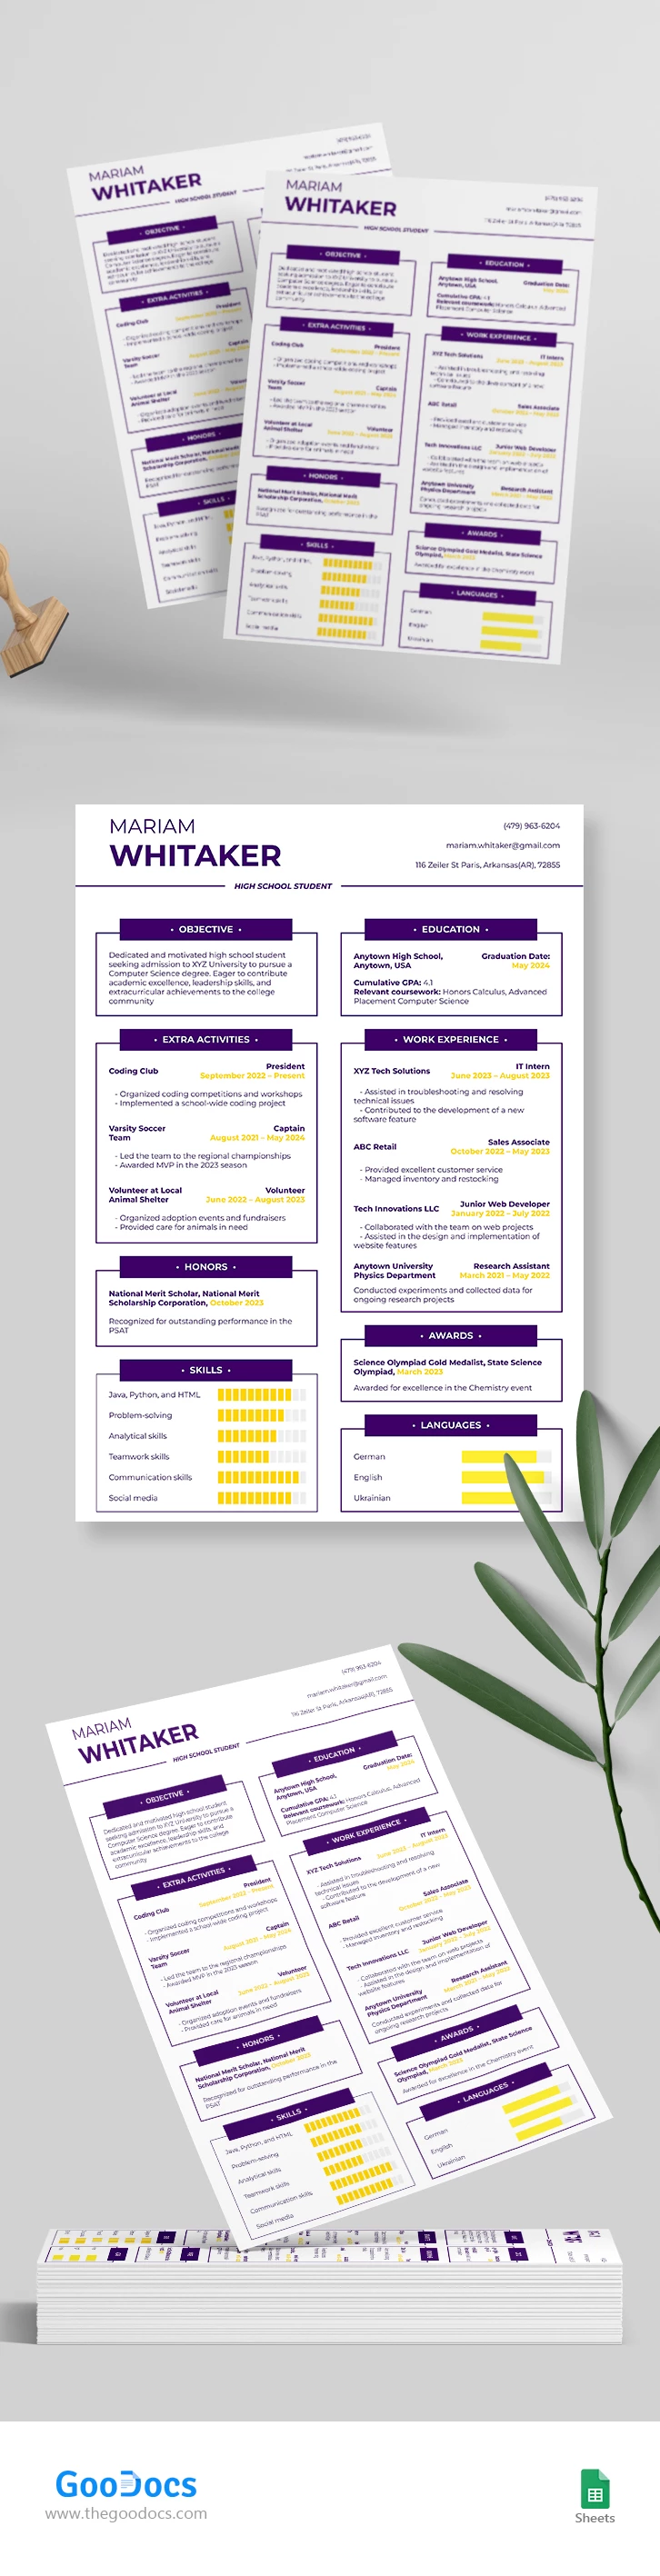 High School Resume for College - free Google Docs Template - 10068081